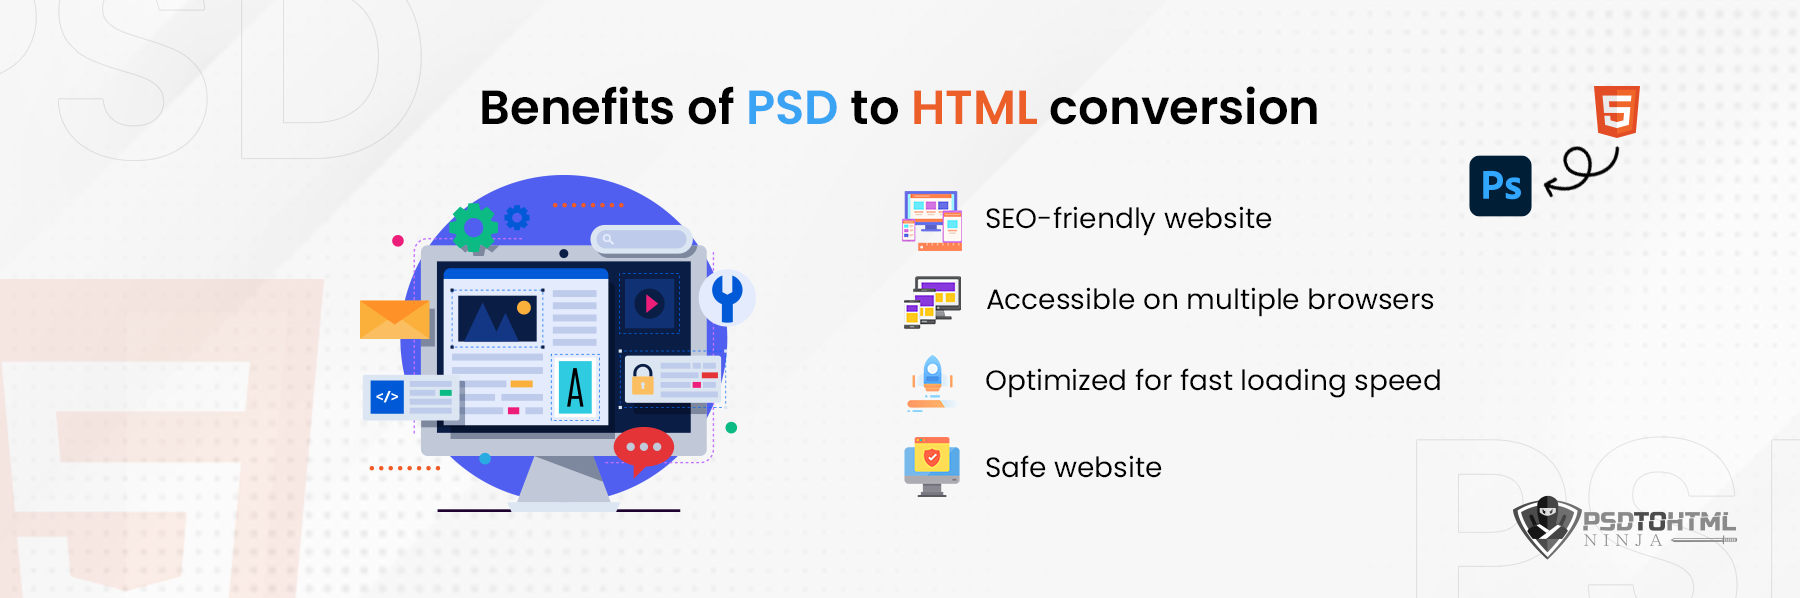 benefits-of-psd-to-html-conversion